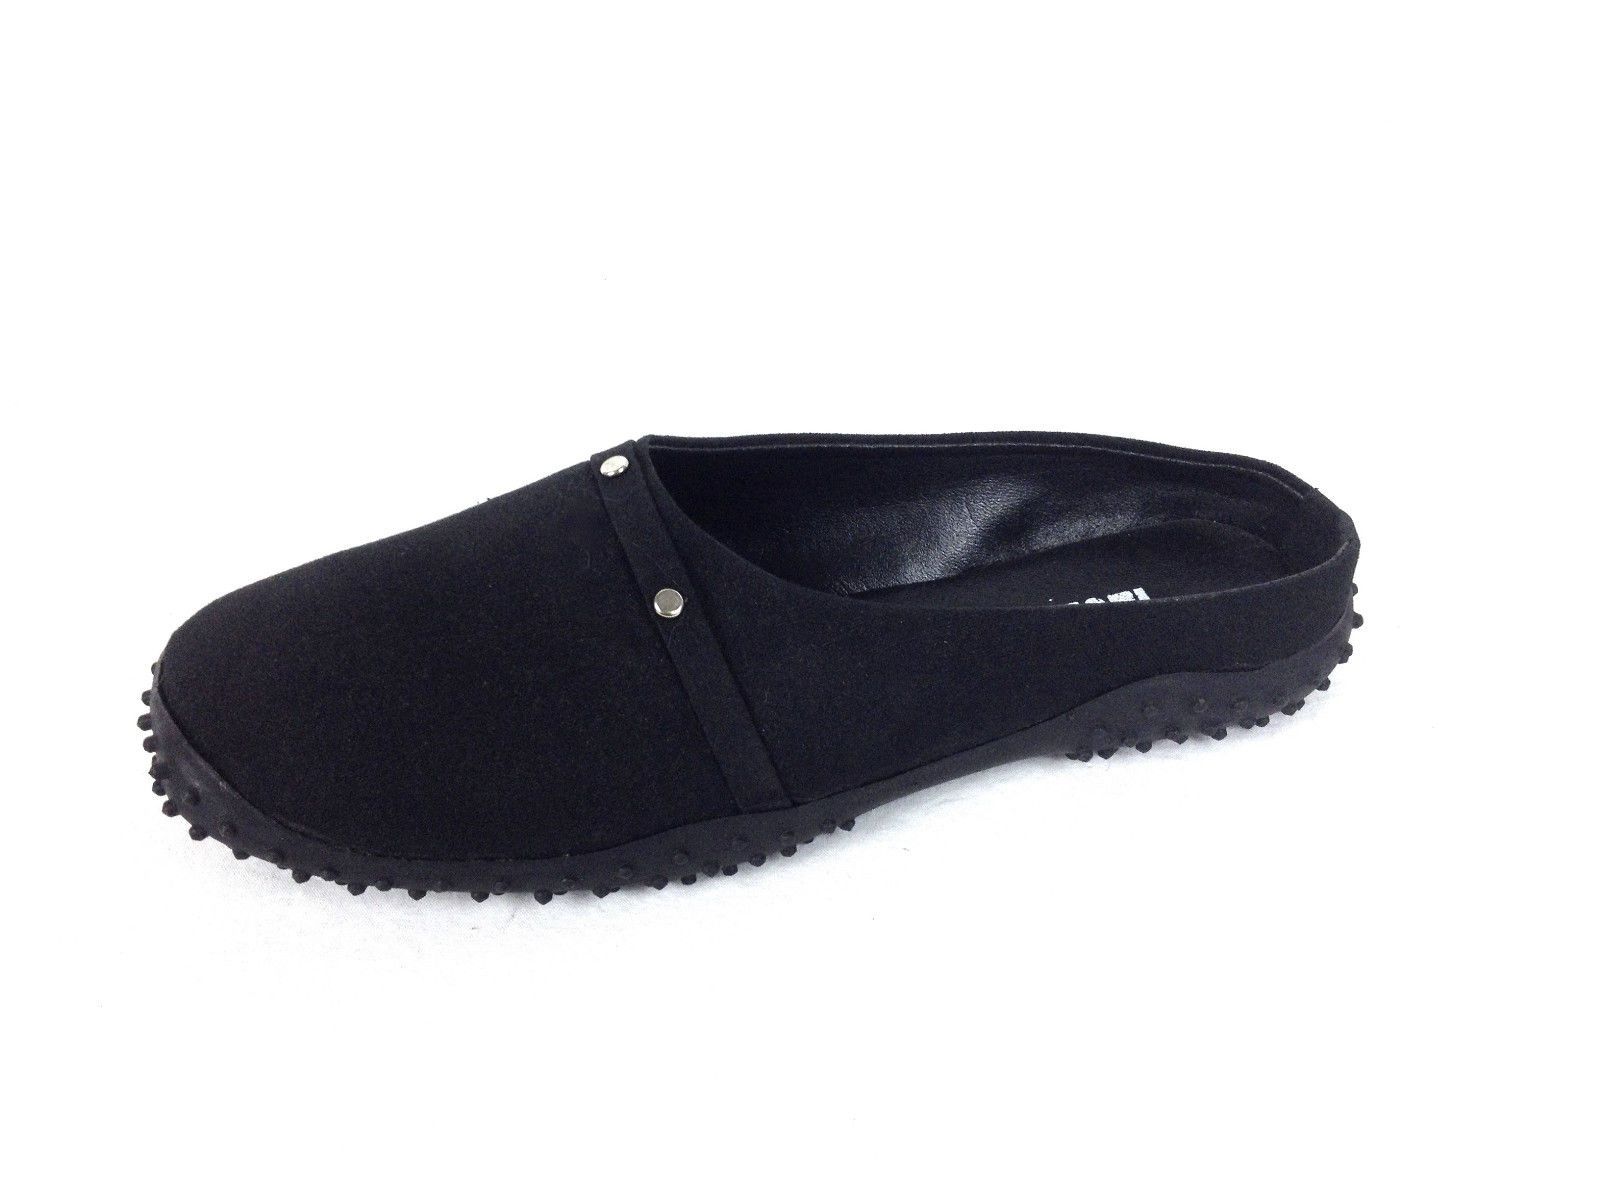 Diesel Shoes 7.5 Womens Black Canvas Loafers For Sale - Item #1474112